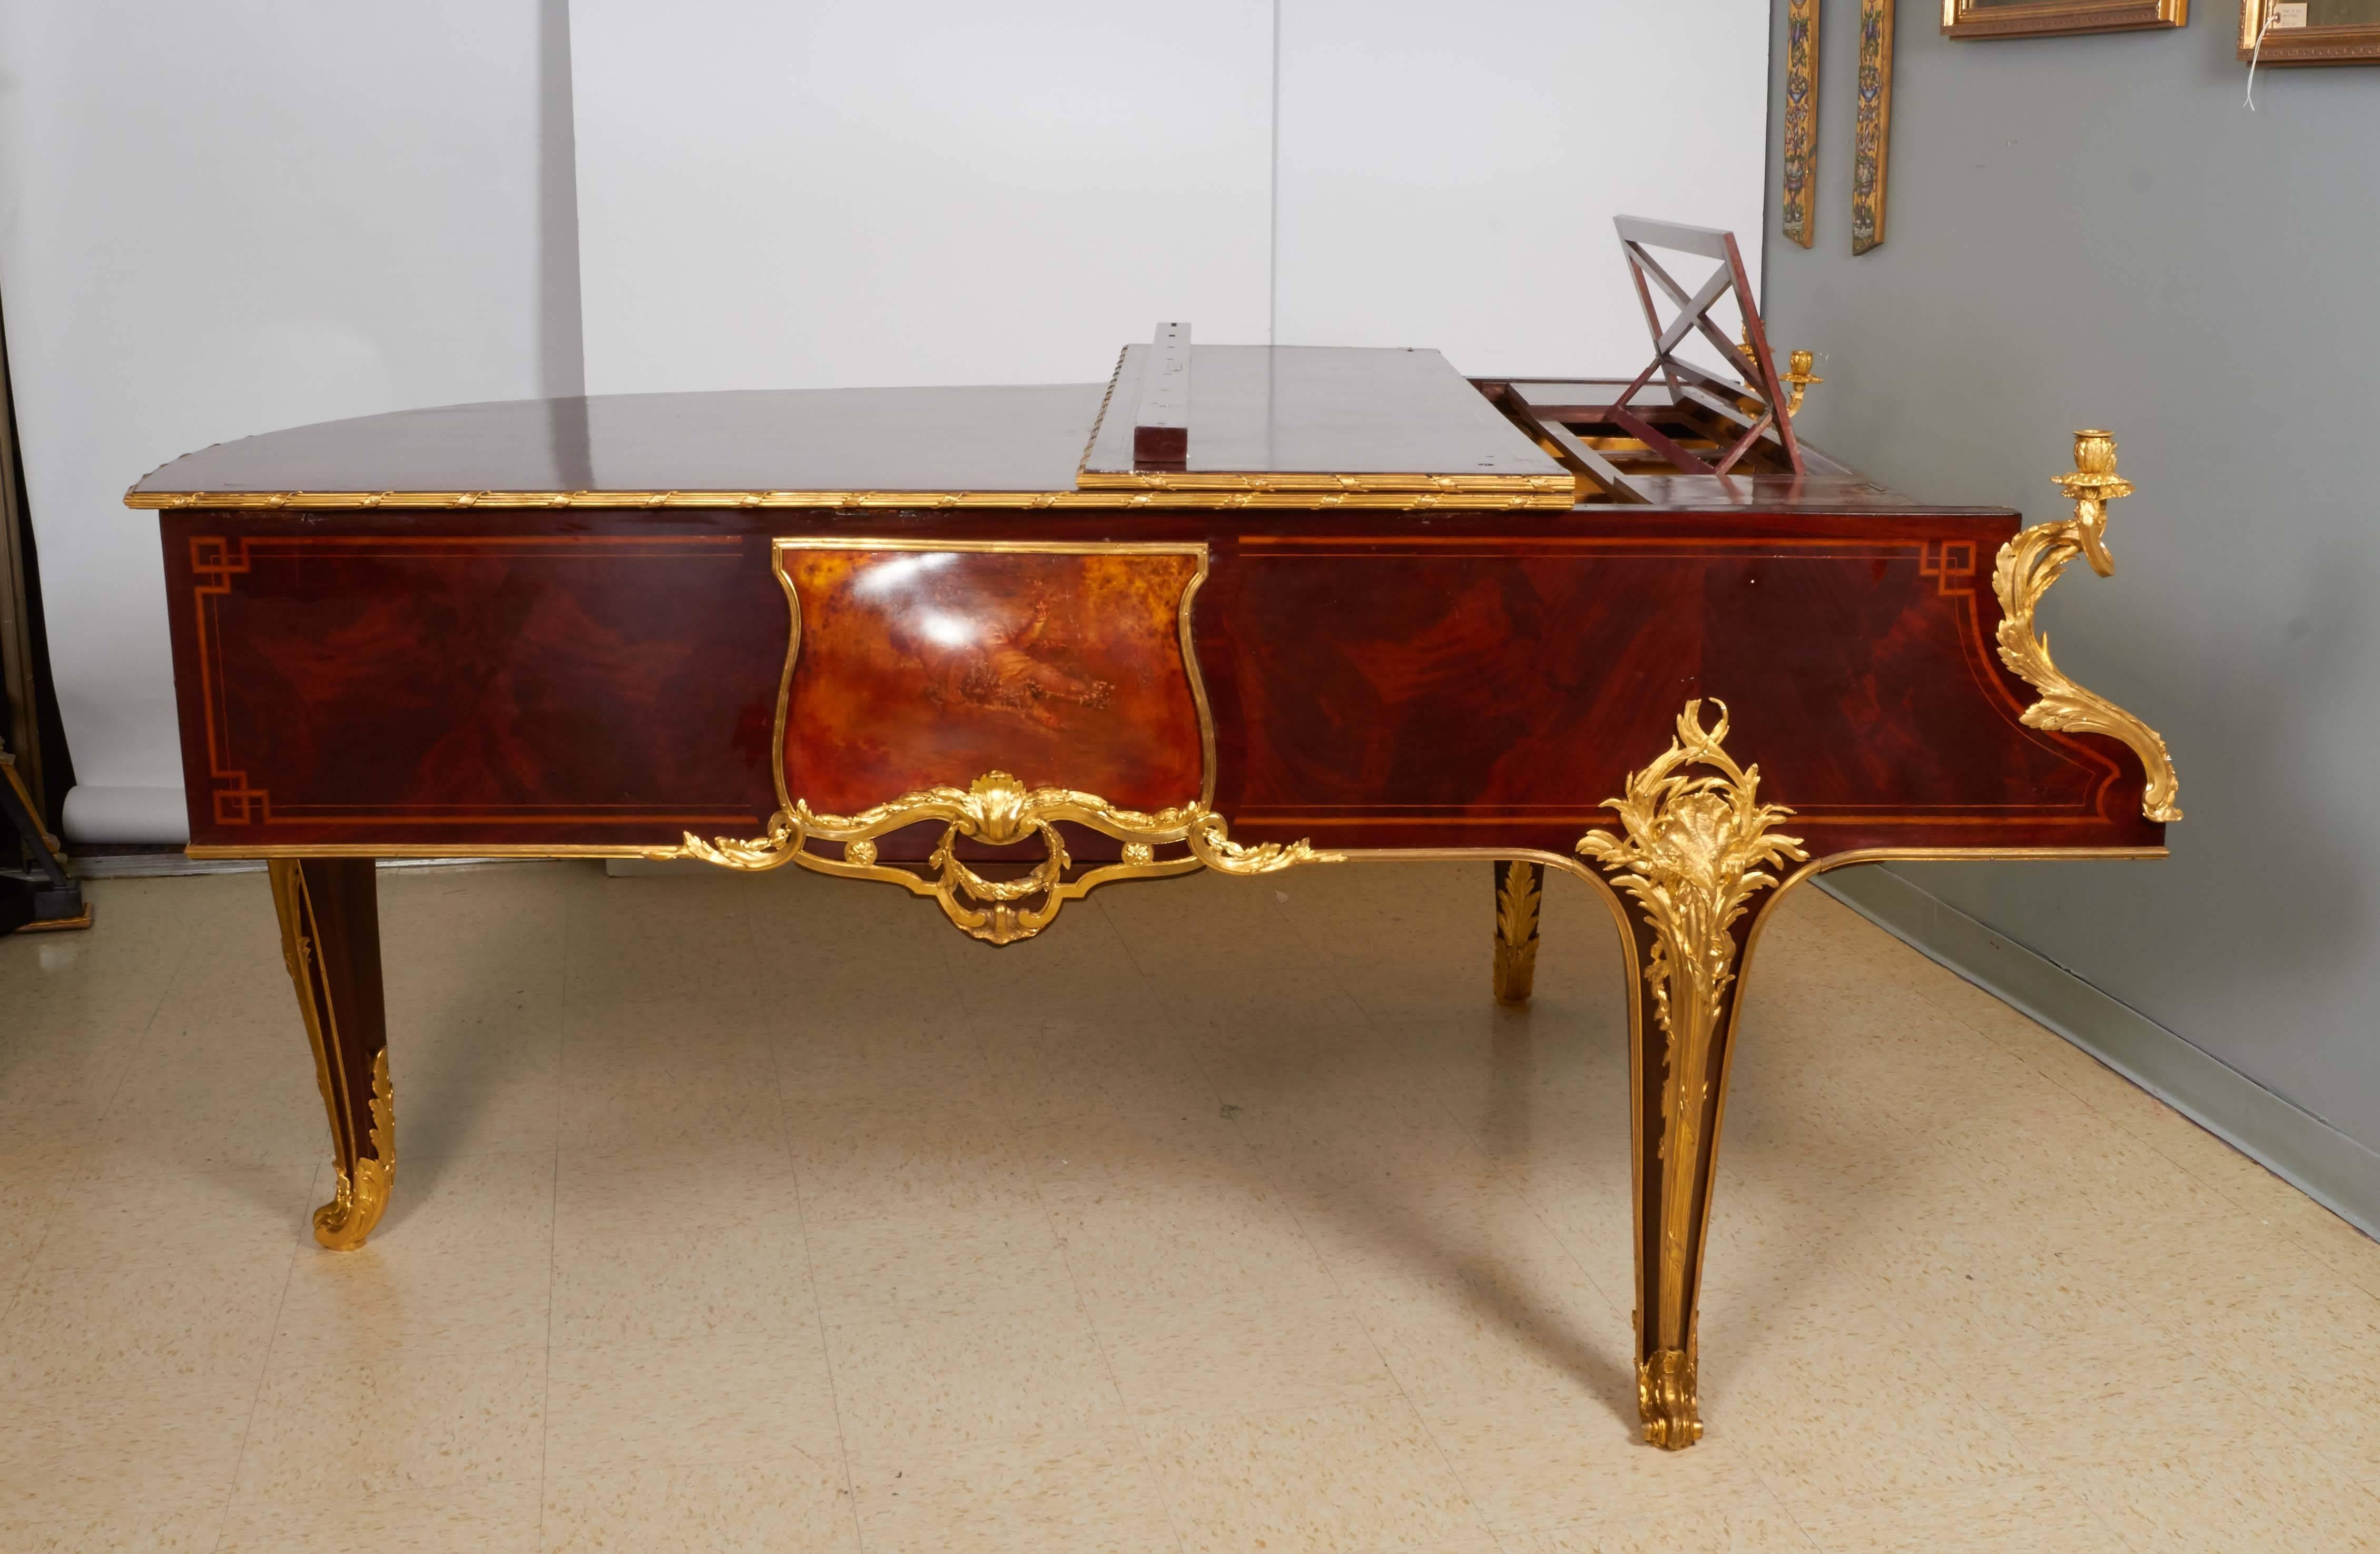 Bronze French Ormolu-Mounted Kingwood and Vernis Martin Piano by Pleyel and Barbedienne